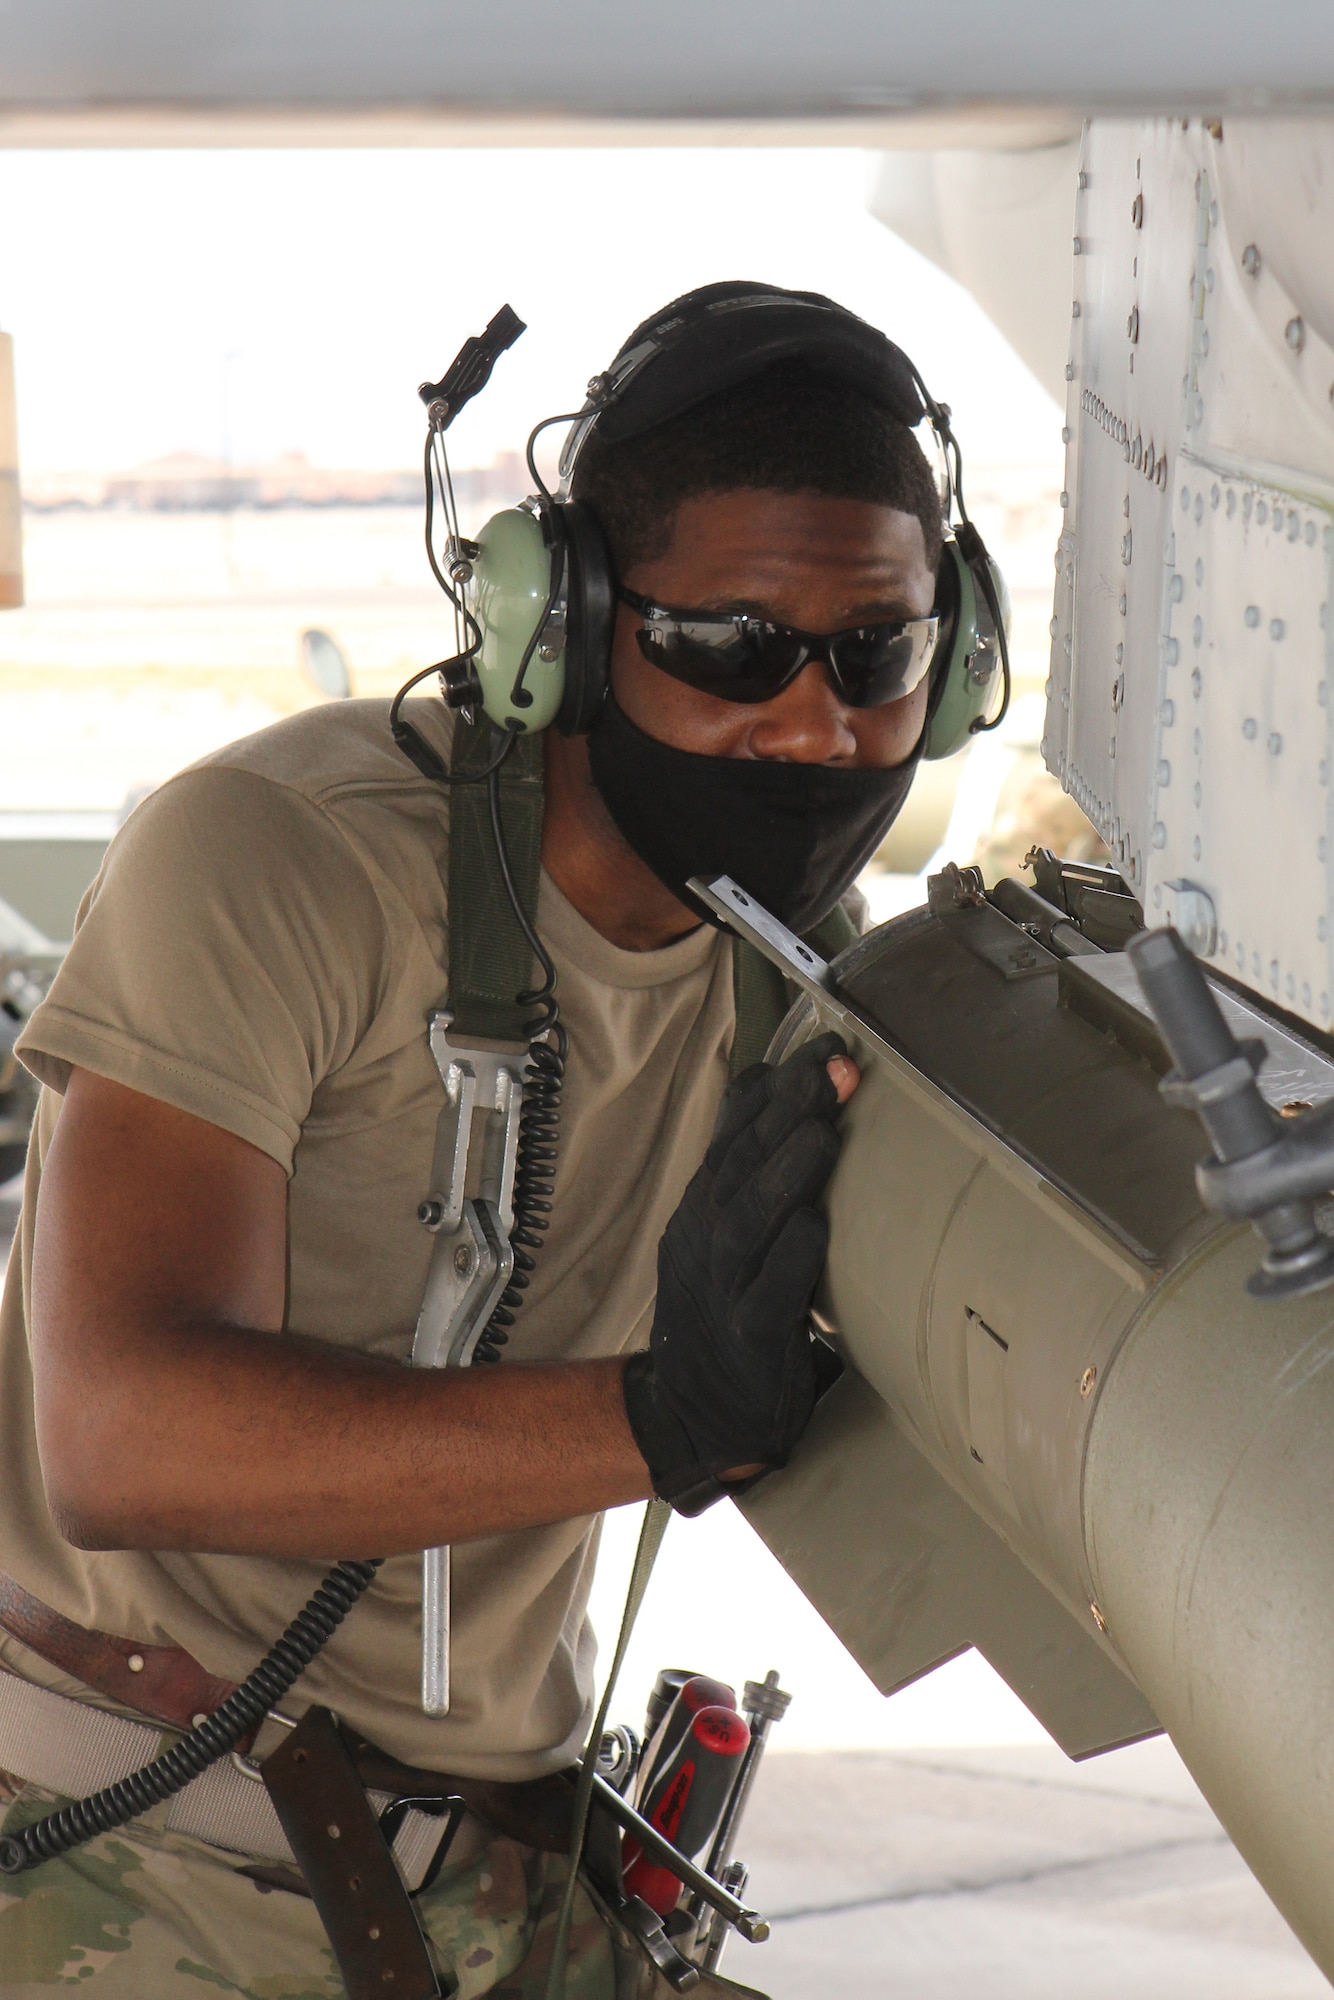 Senior Airman Maurice Starks, from the 127th Wing, loads a bomb unto a A-10 Thunderbolt II aircraft at Nellis Air Force Base, Nev., April 9, 2021.